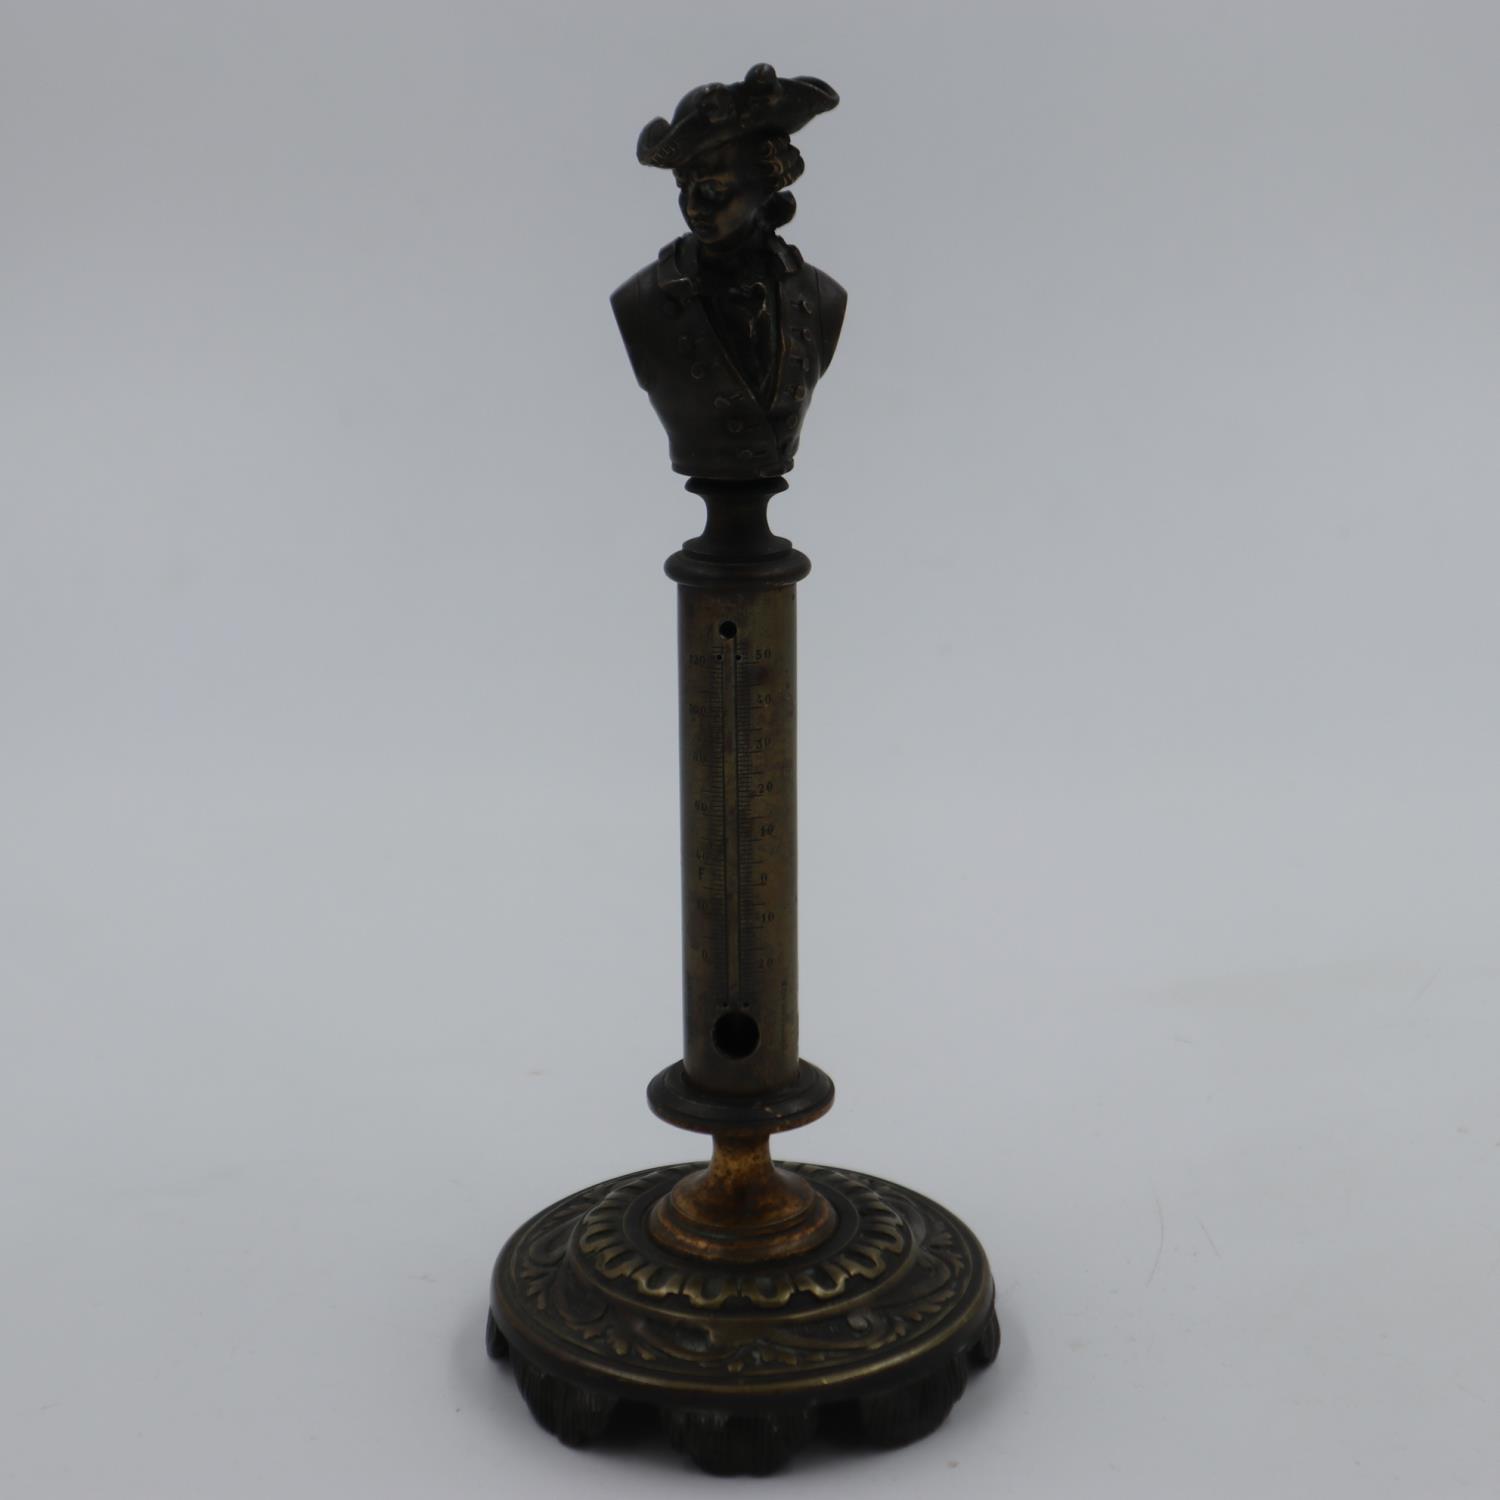 French bronze thermometer stand, H: 20 cm. UK P&P Group 2 (£20+VAT for the first lot and £4+VAT